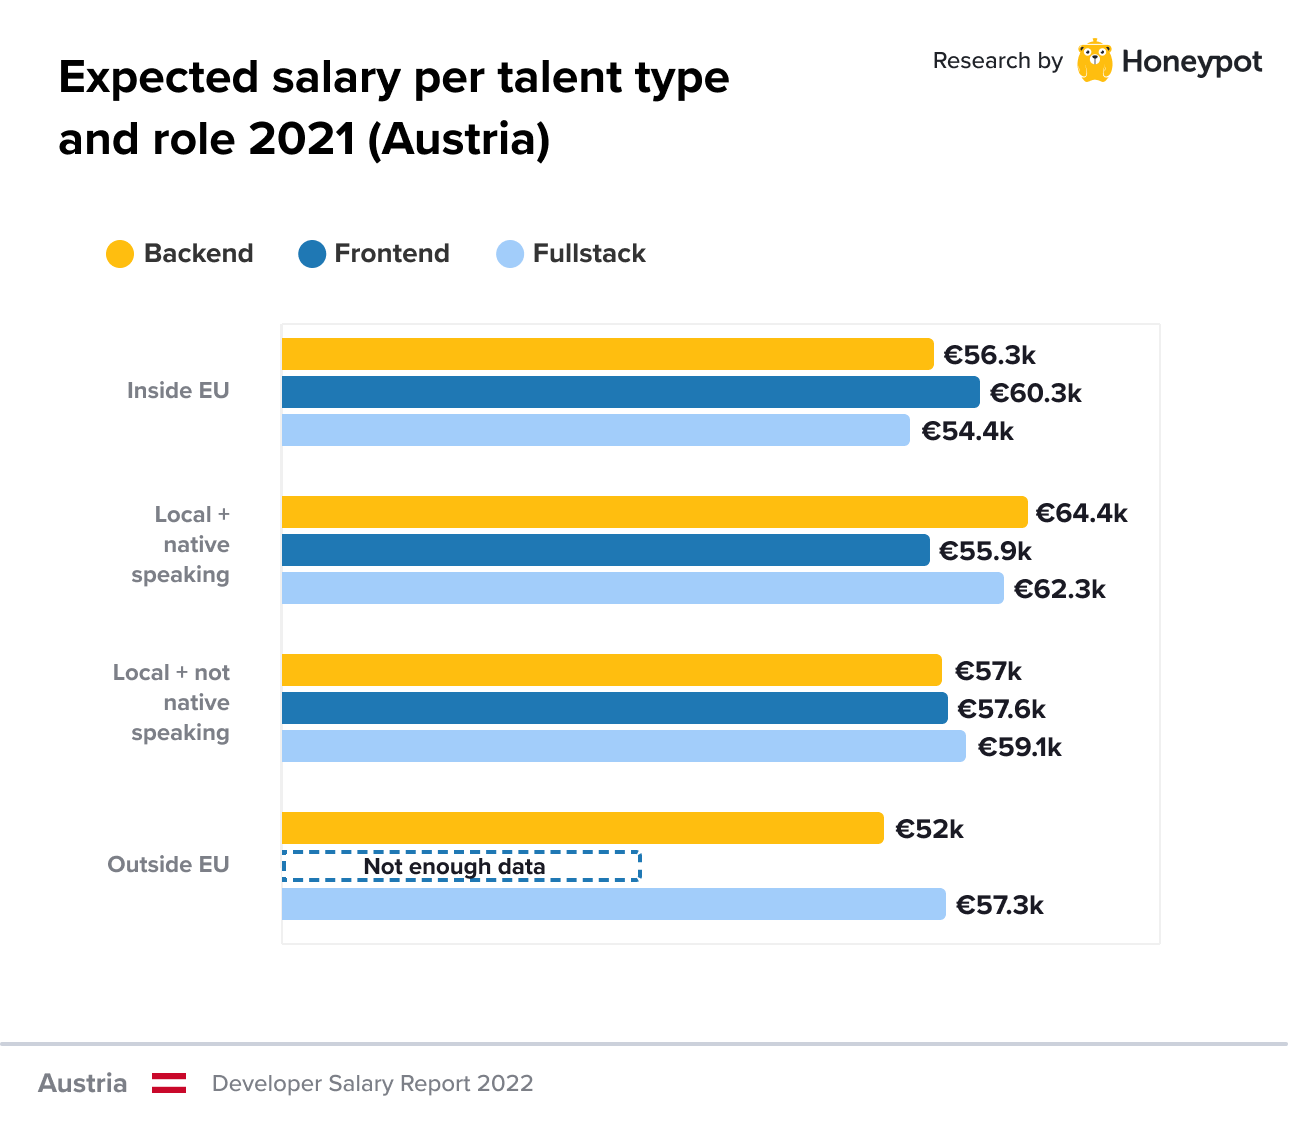 Expected salary per talent type and role 2021 (Austria)